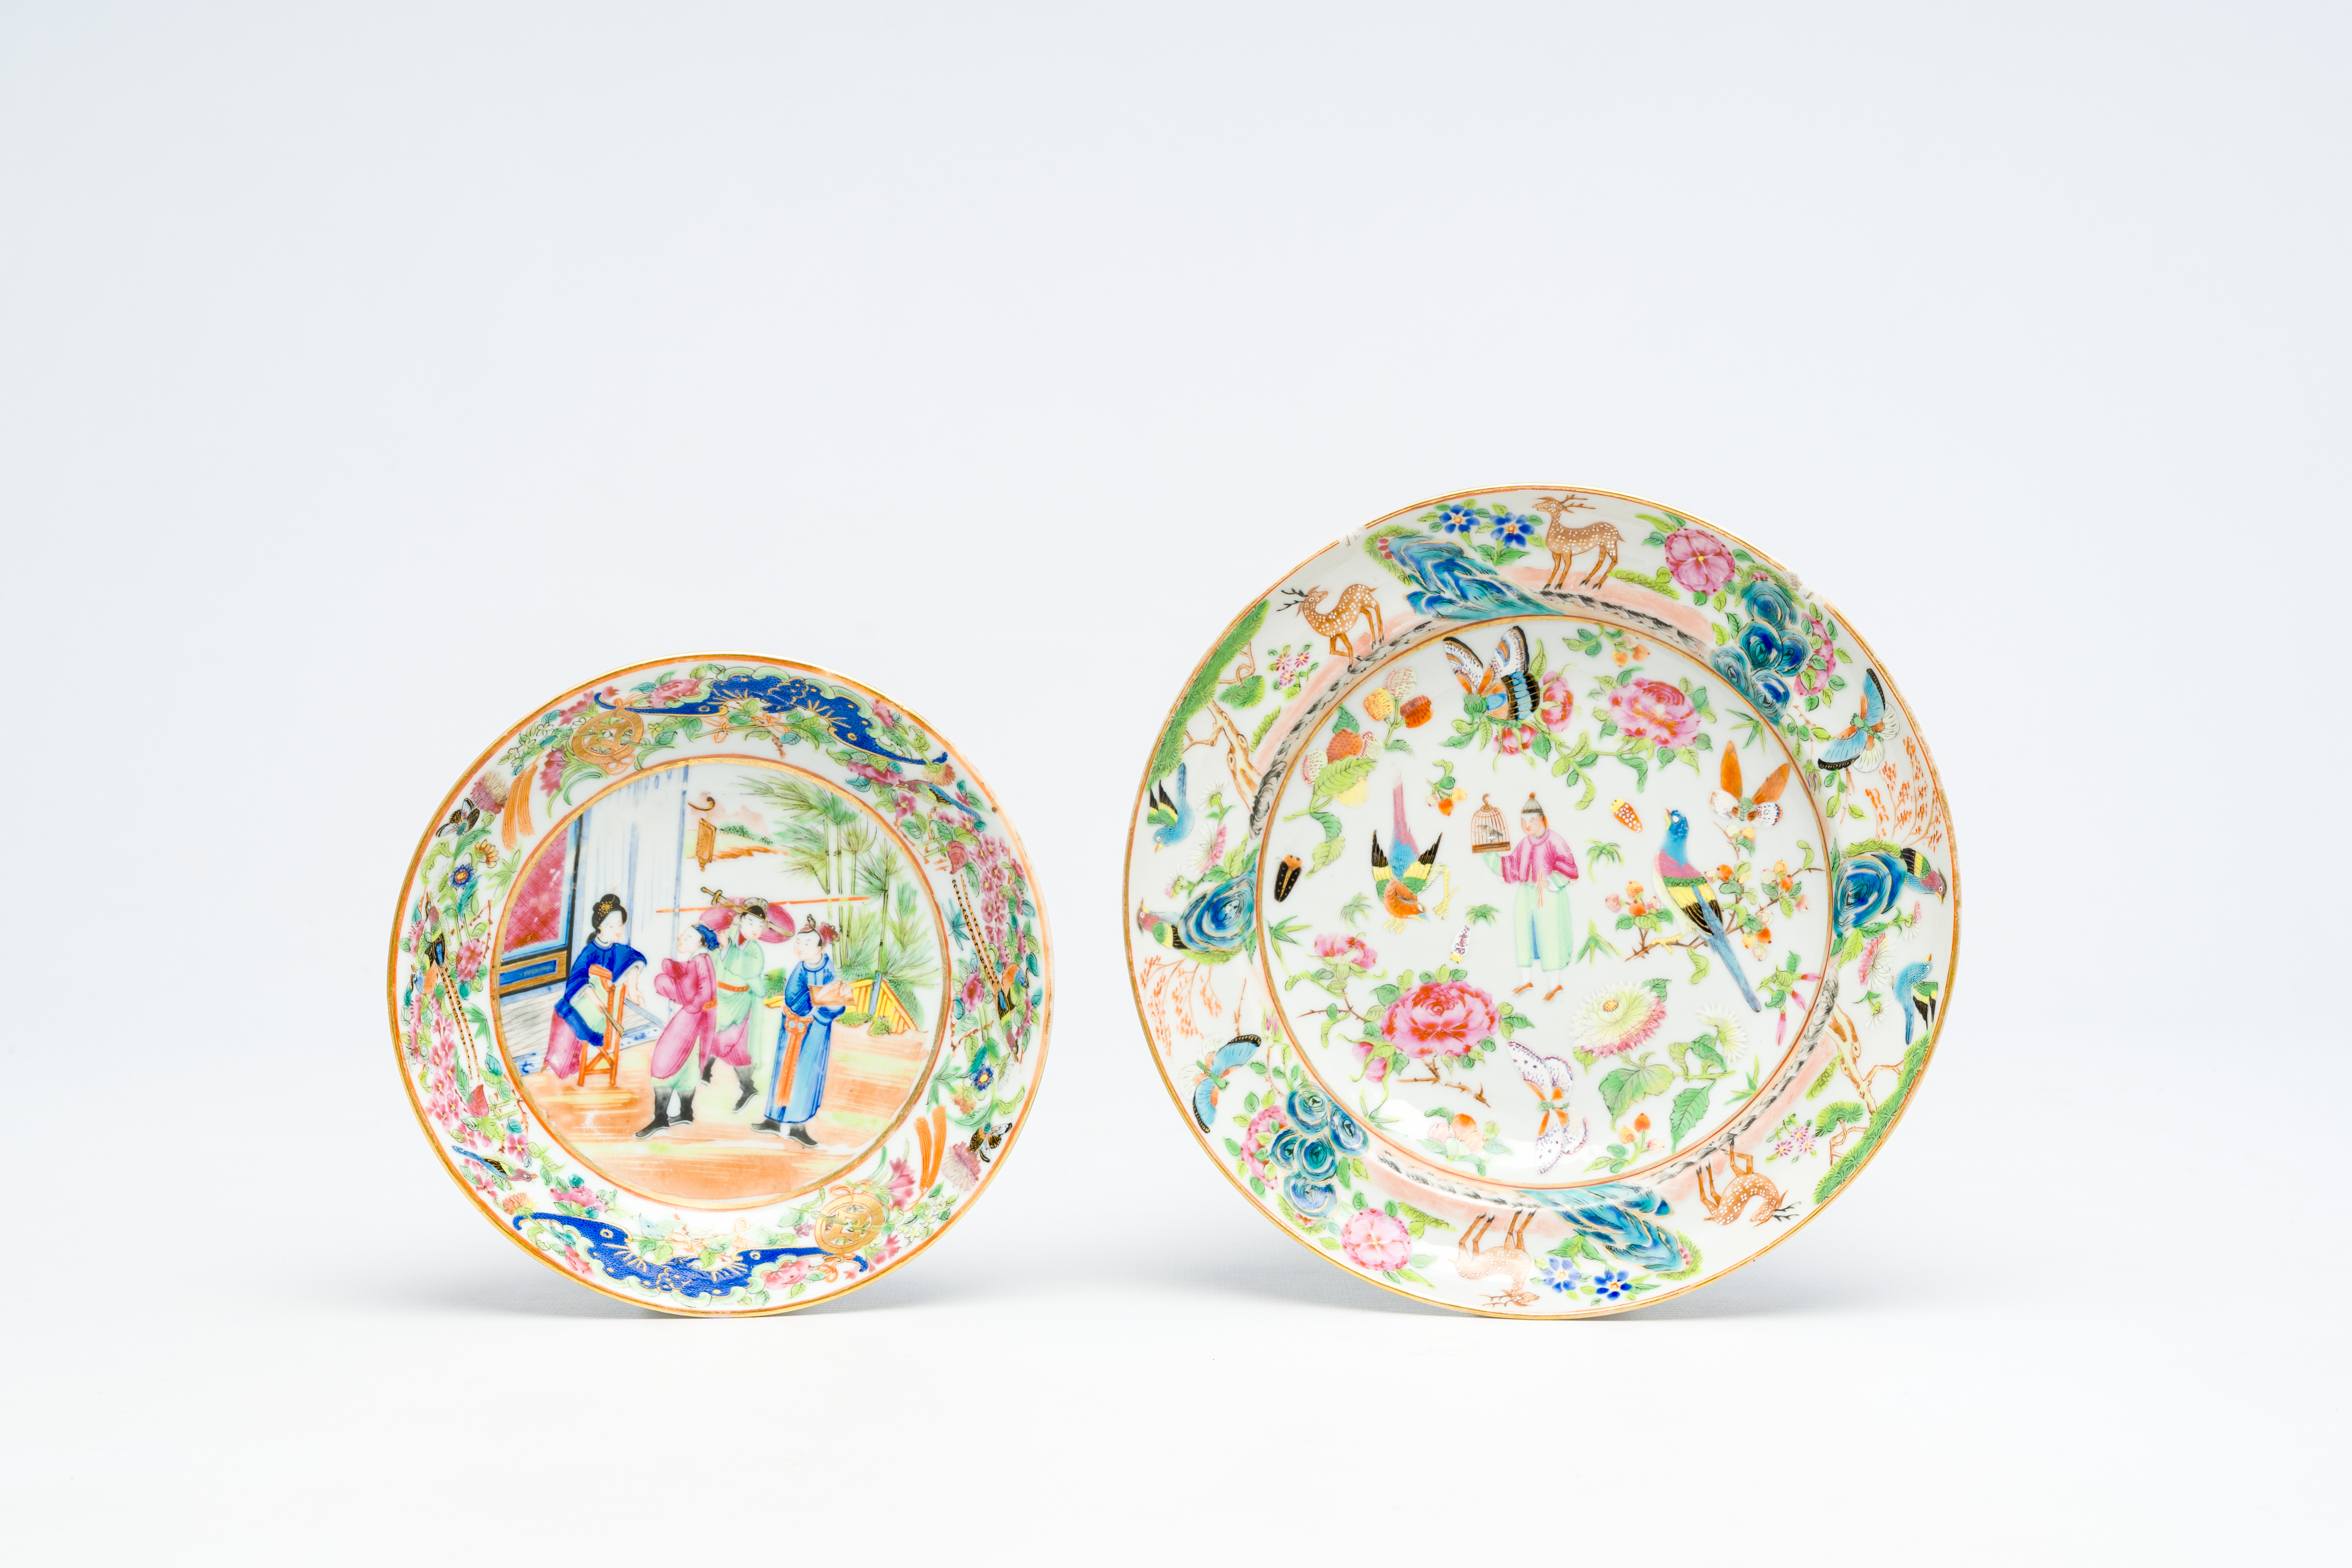 Five Chinese Canton famille rose plates with palace scenes and figurative design, 19th C. - Image 4 of 5